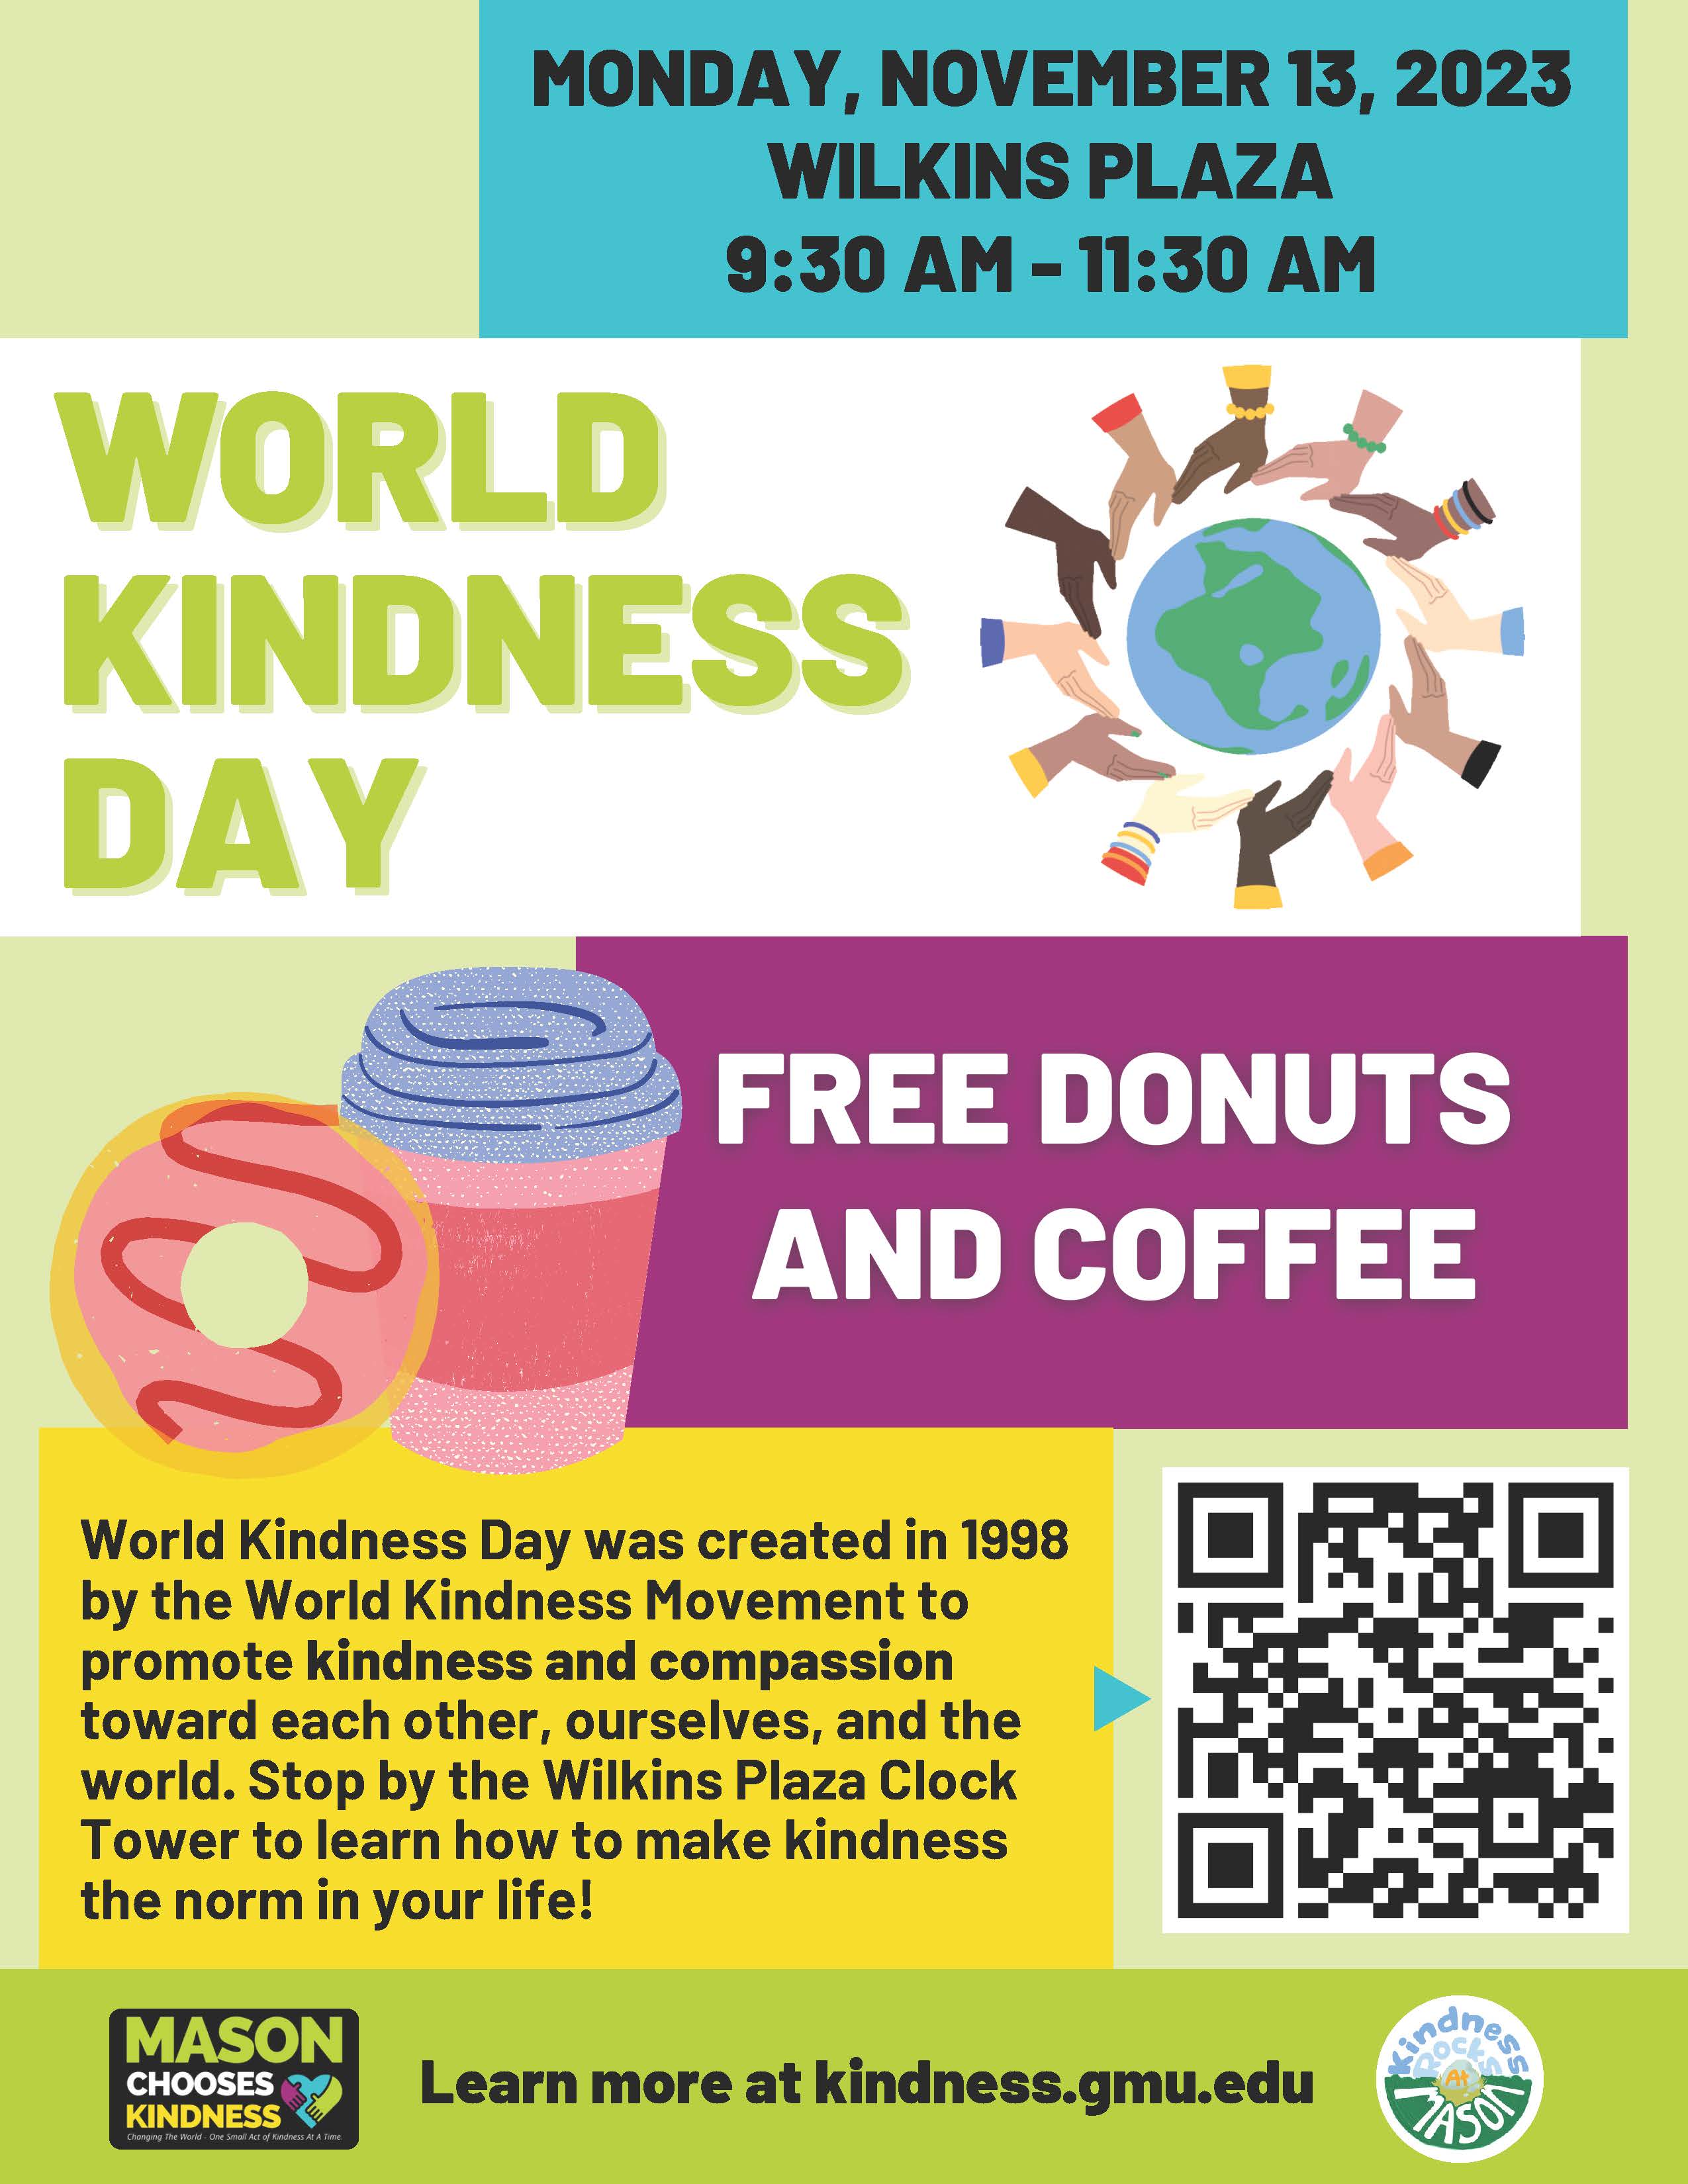 World Kindness Day at Mason, Mon, November 13 from 9:30-11:30am, Wilkins Plaza, GMU Fairfax campus. Learn more about the kindness revolution at kindness.gmu.edu #MasonChoosesKindness #WorldKindnessDay